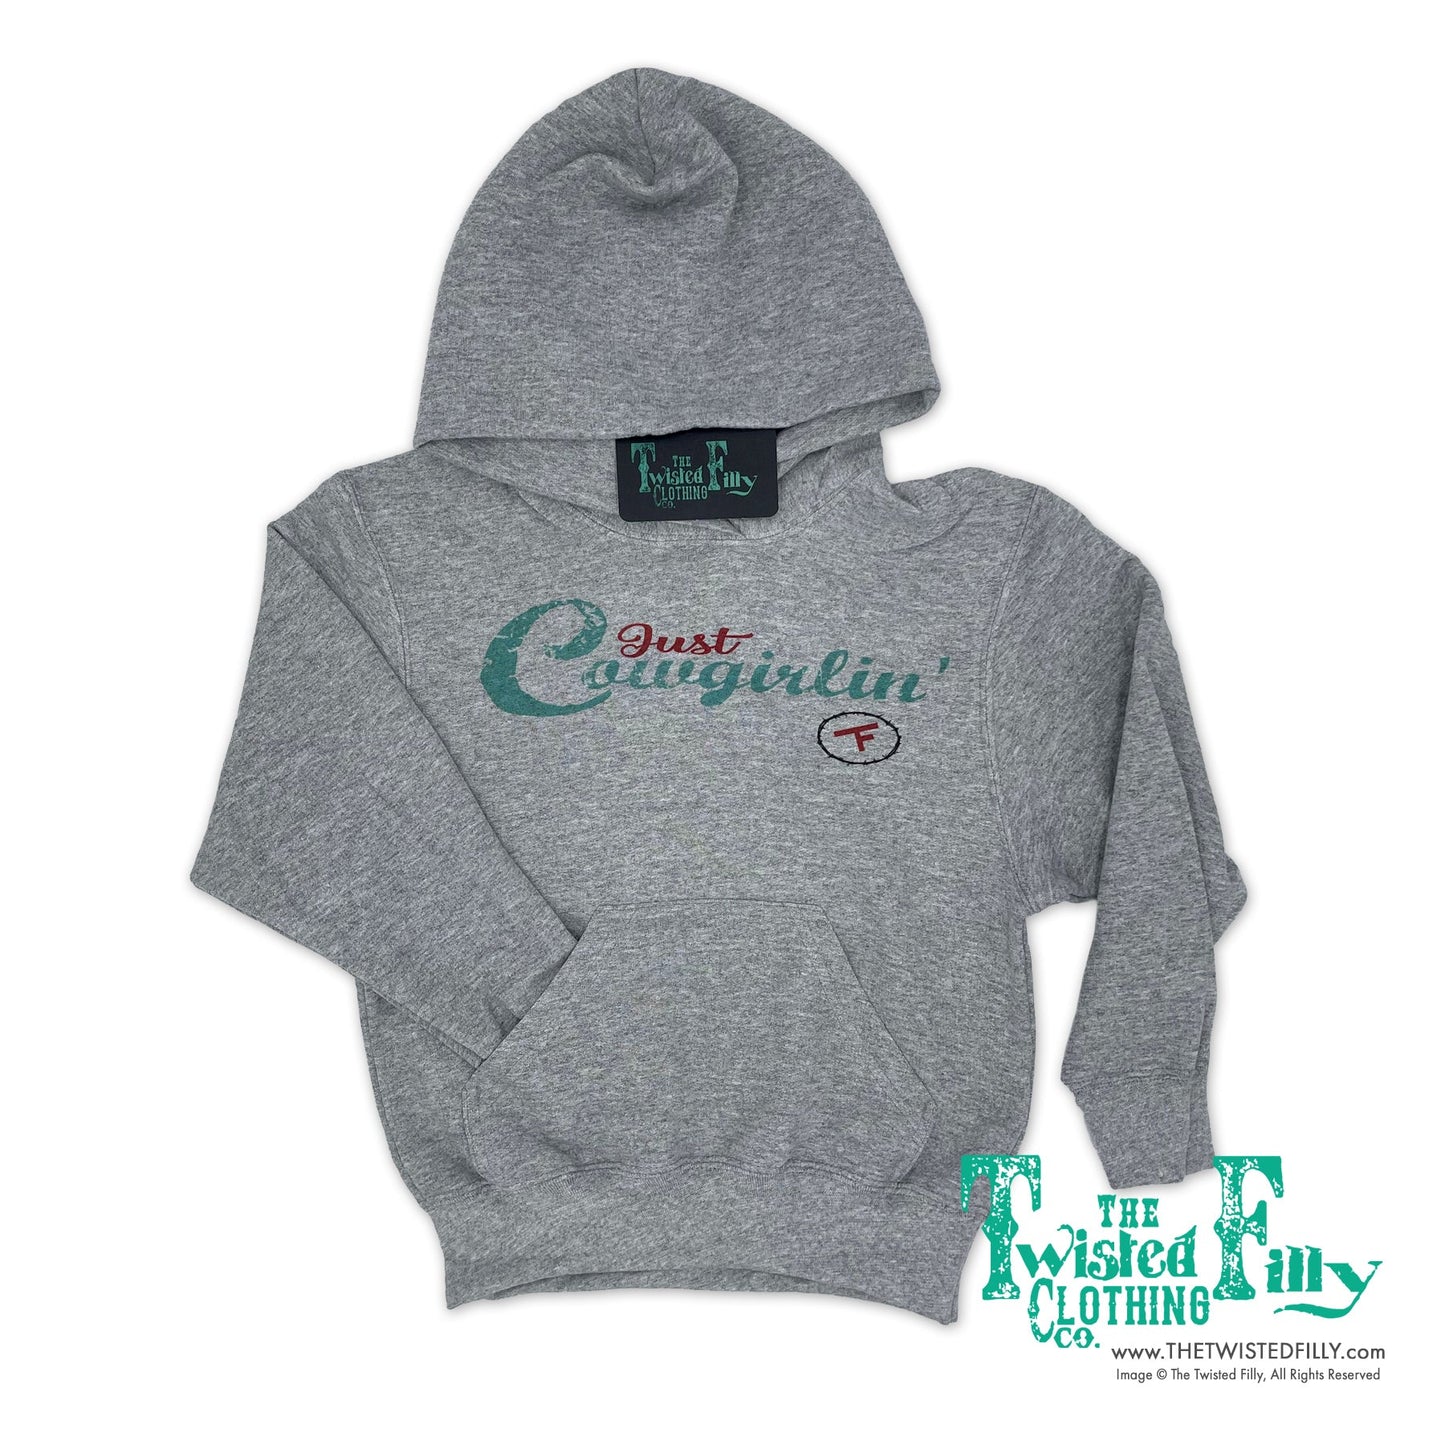 Just Cowgirlin' - Adult Women's Hoodie - Gray